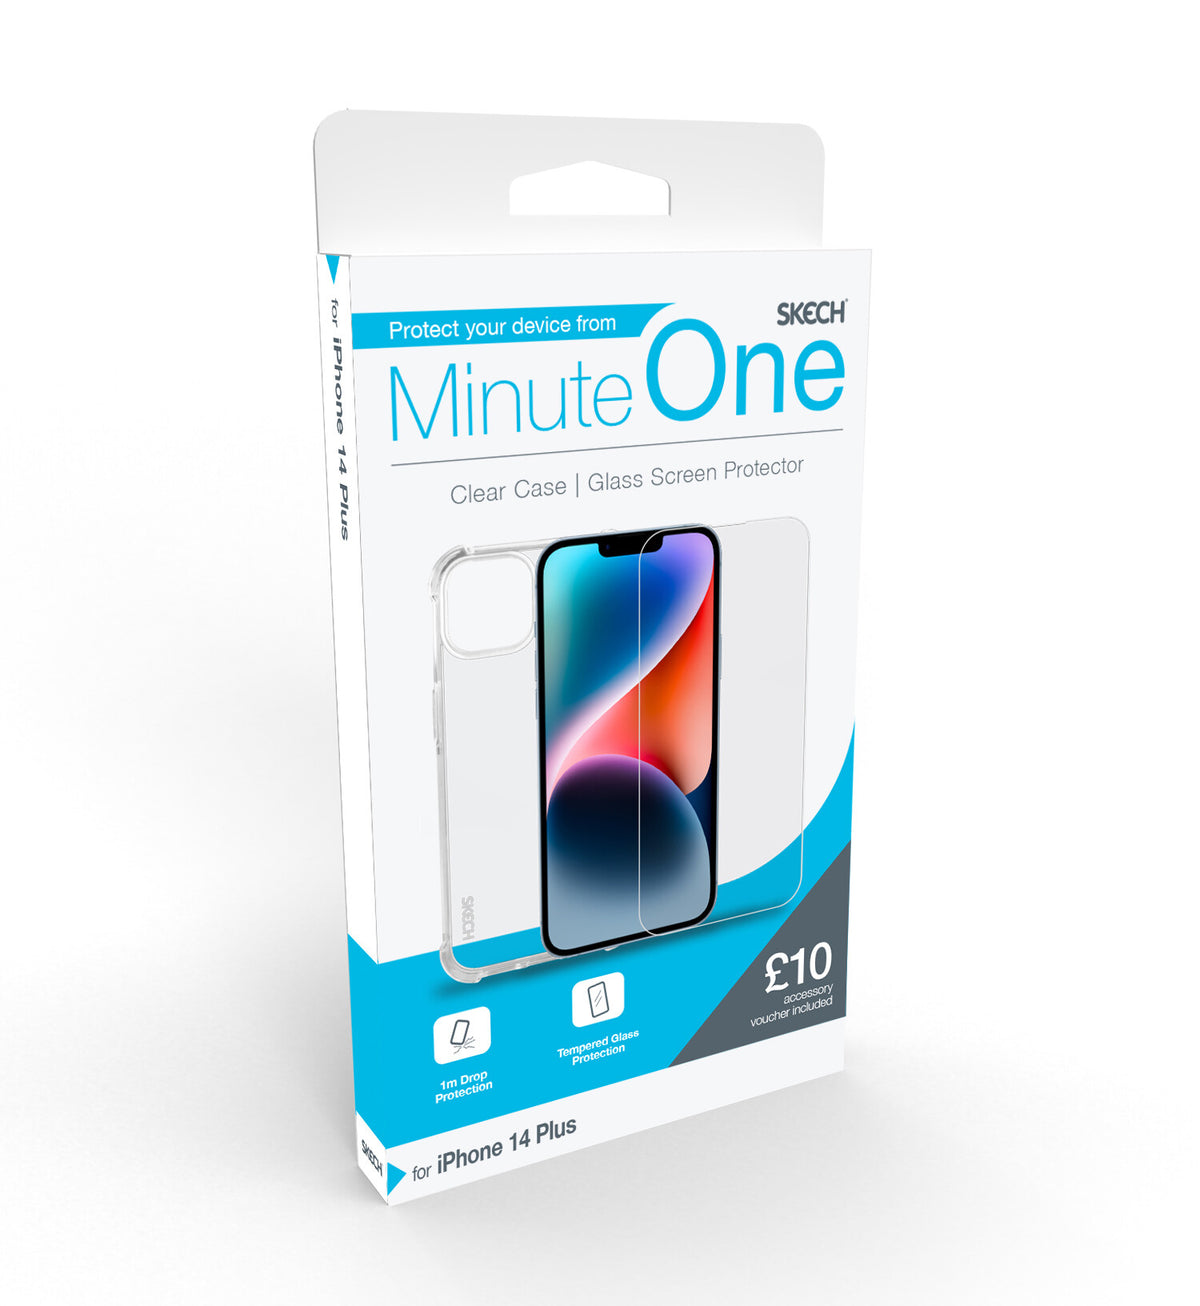 Skech Minute One Bundle for iPhone 14 Plus